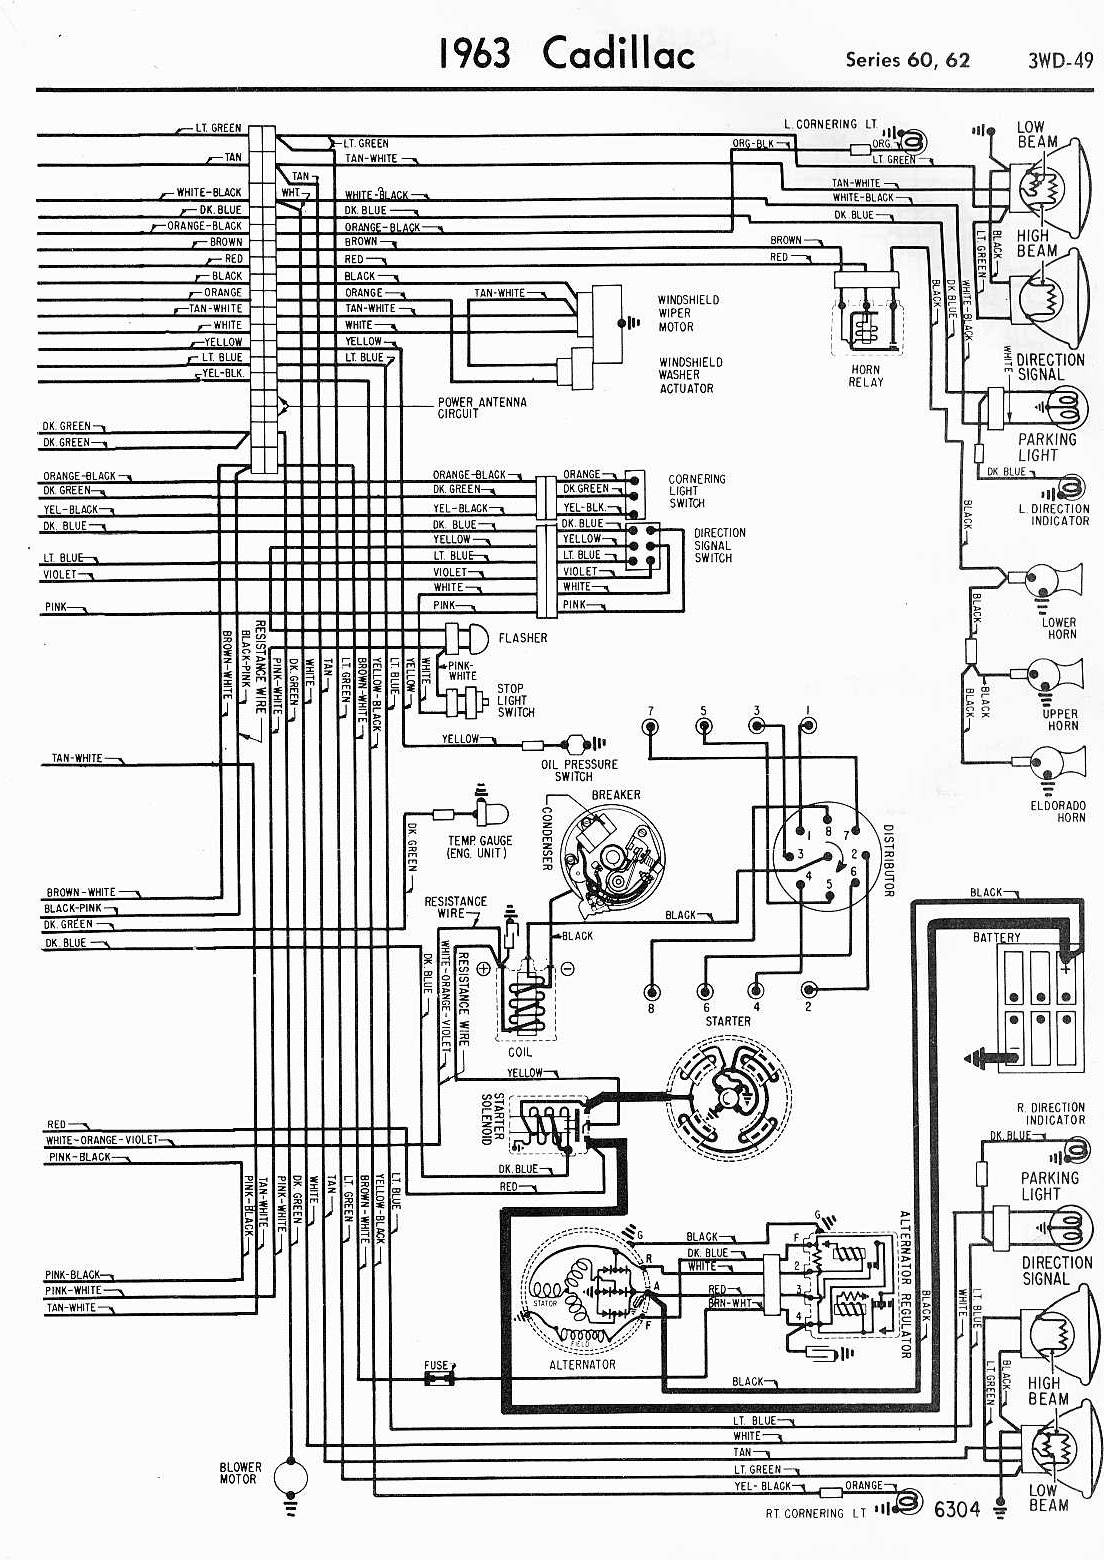 2005 Cadillac Deville Service Seat Wiring Diagram from www.automotive-manuals.net